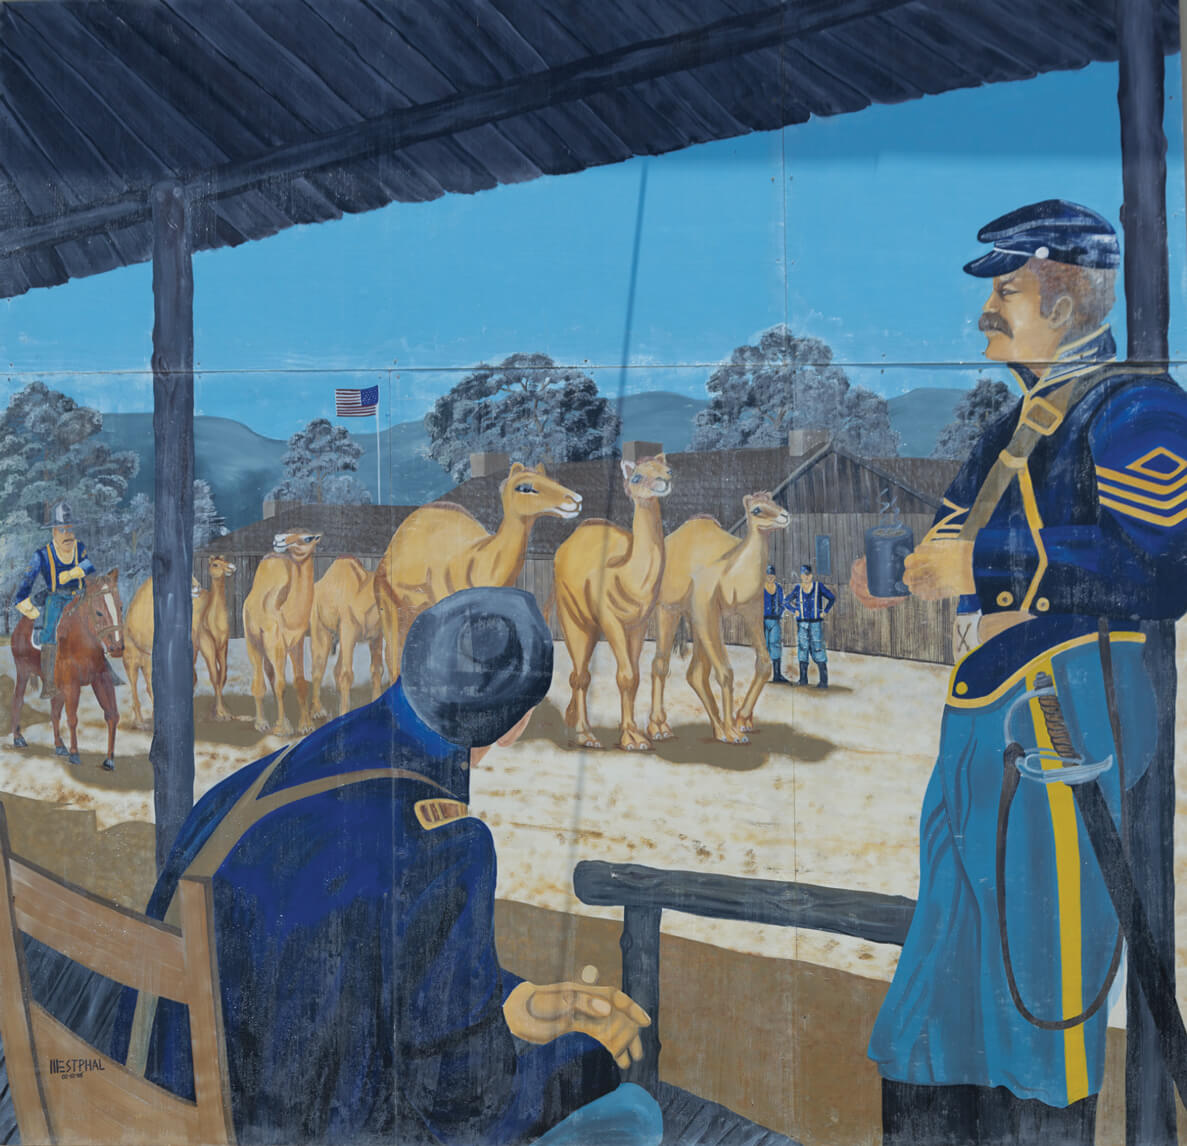 A photograph of a mural depicting the arrival of the Camel Corps at the American Army's Camp Verde in Texas.